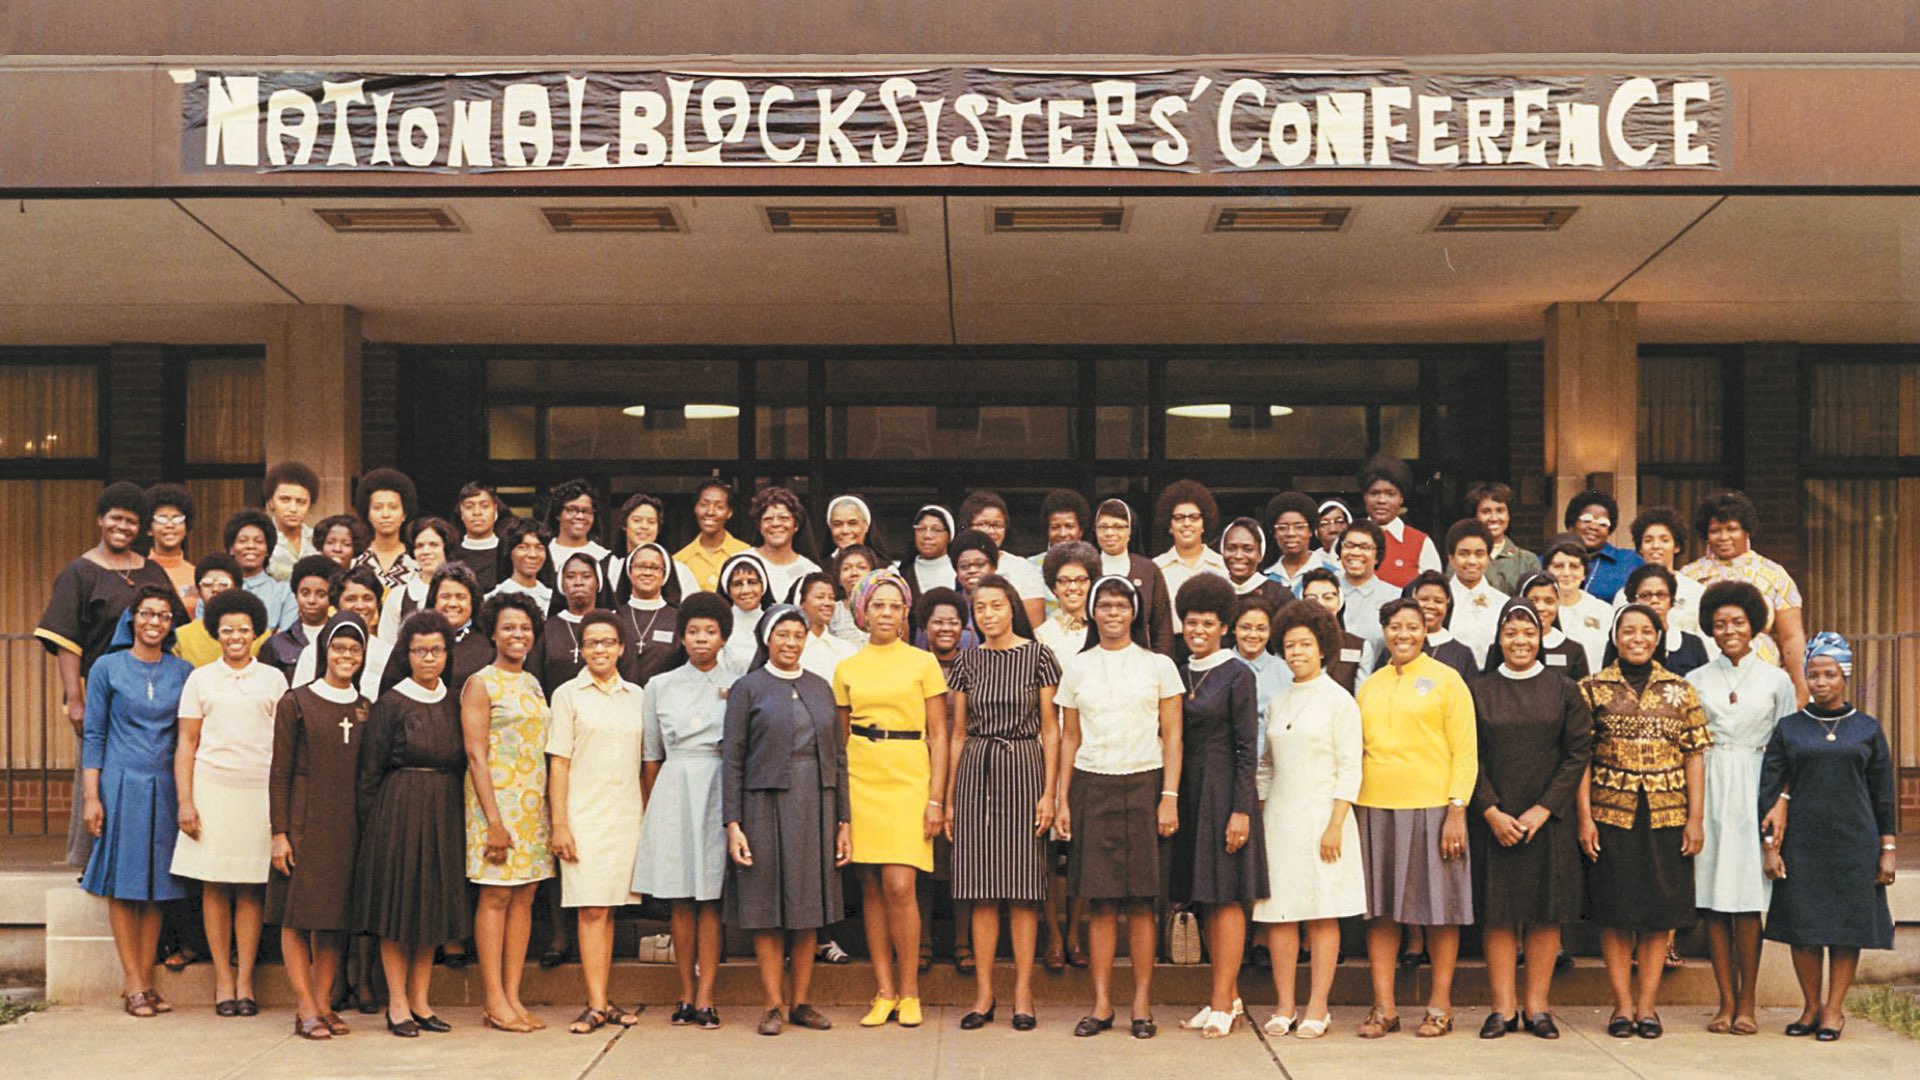 National Black Sisters’ Conference outside the conference headquarters in the early 1970s